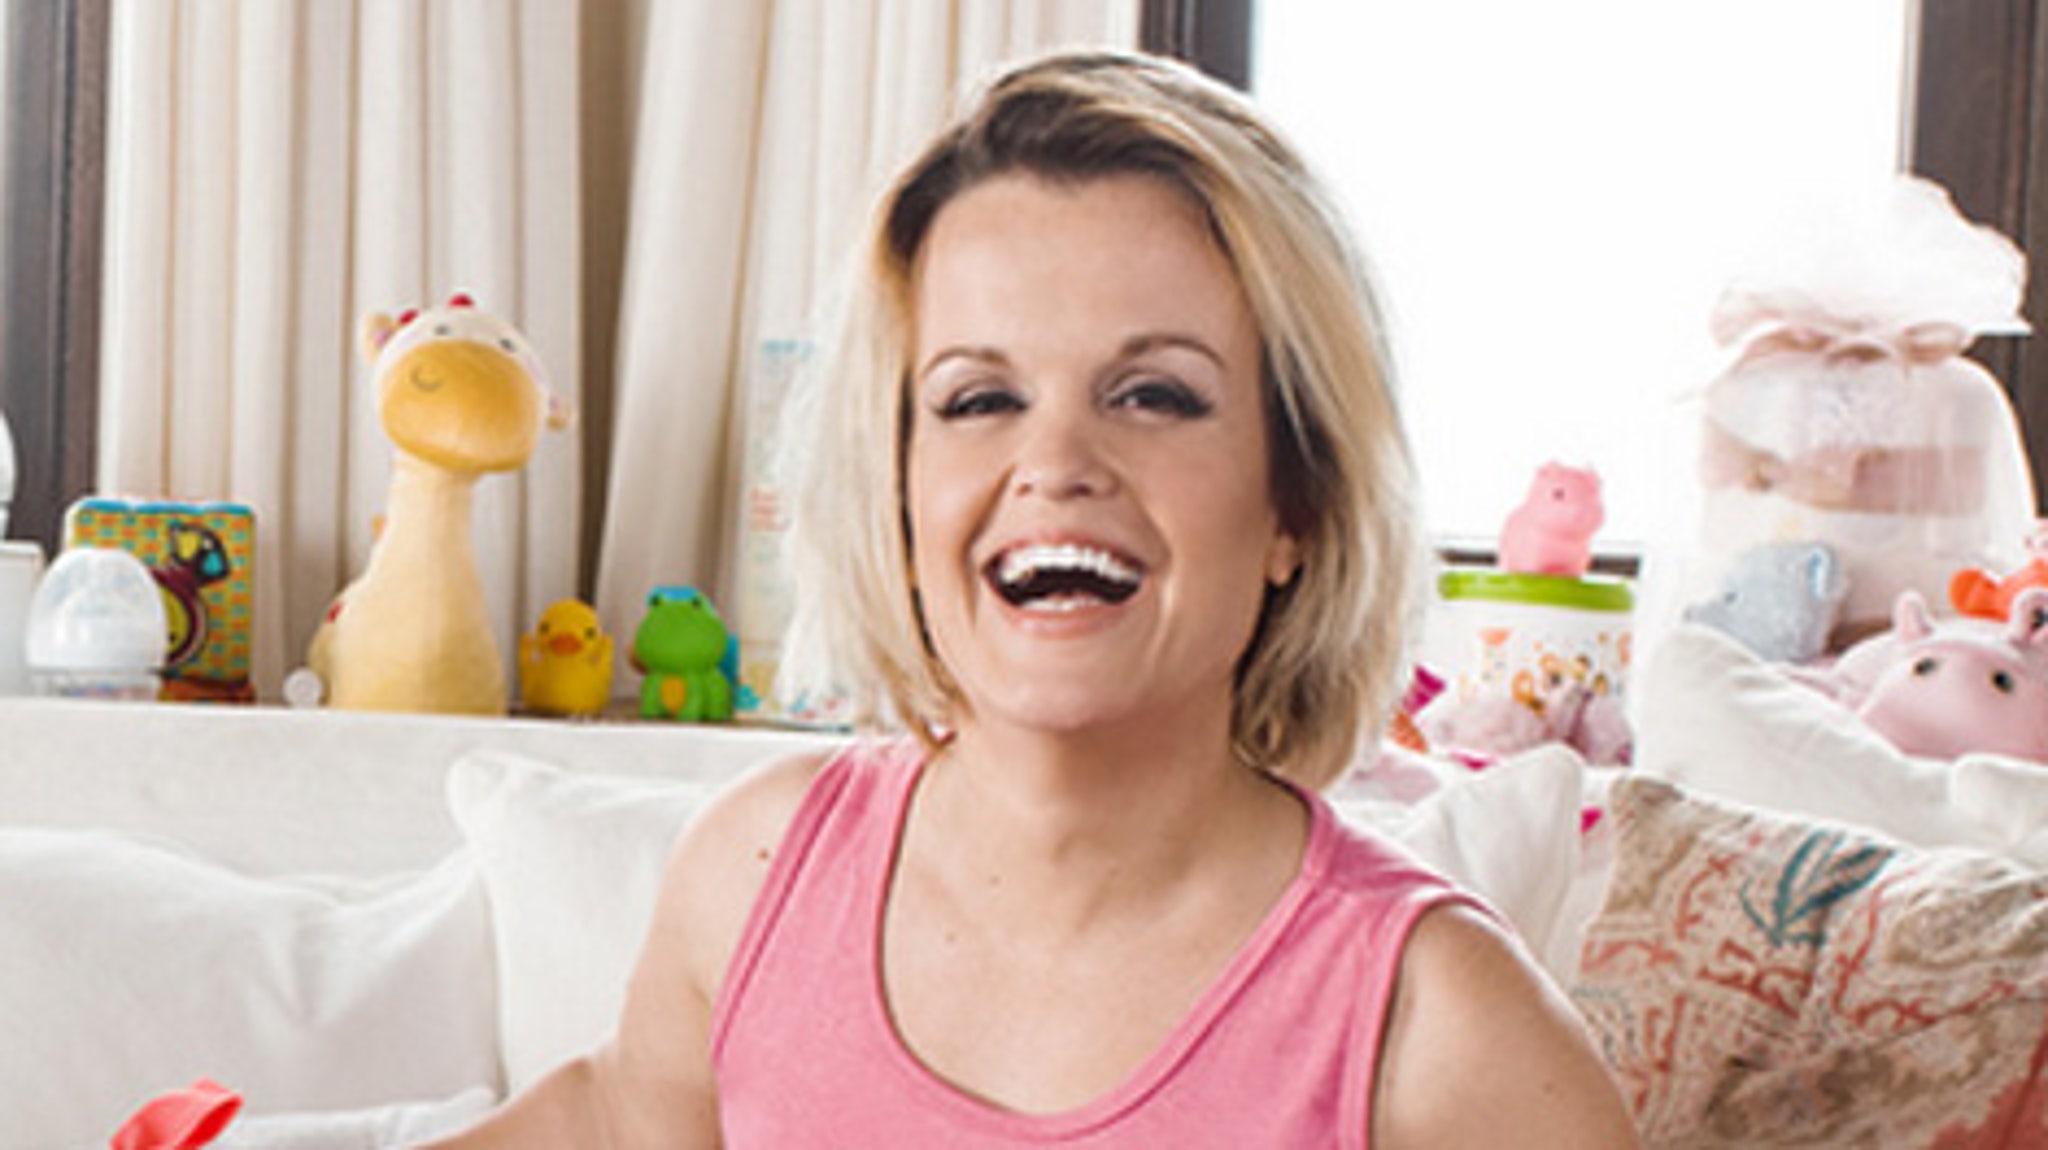 Little Women: LA Star Terra Jolé Shares Cute Pic of Her Baby Daughter Magnolia Wearing Floral 